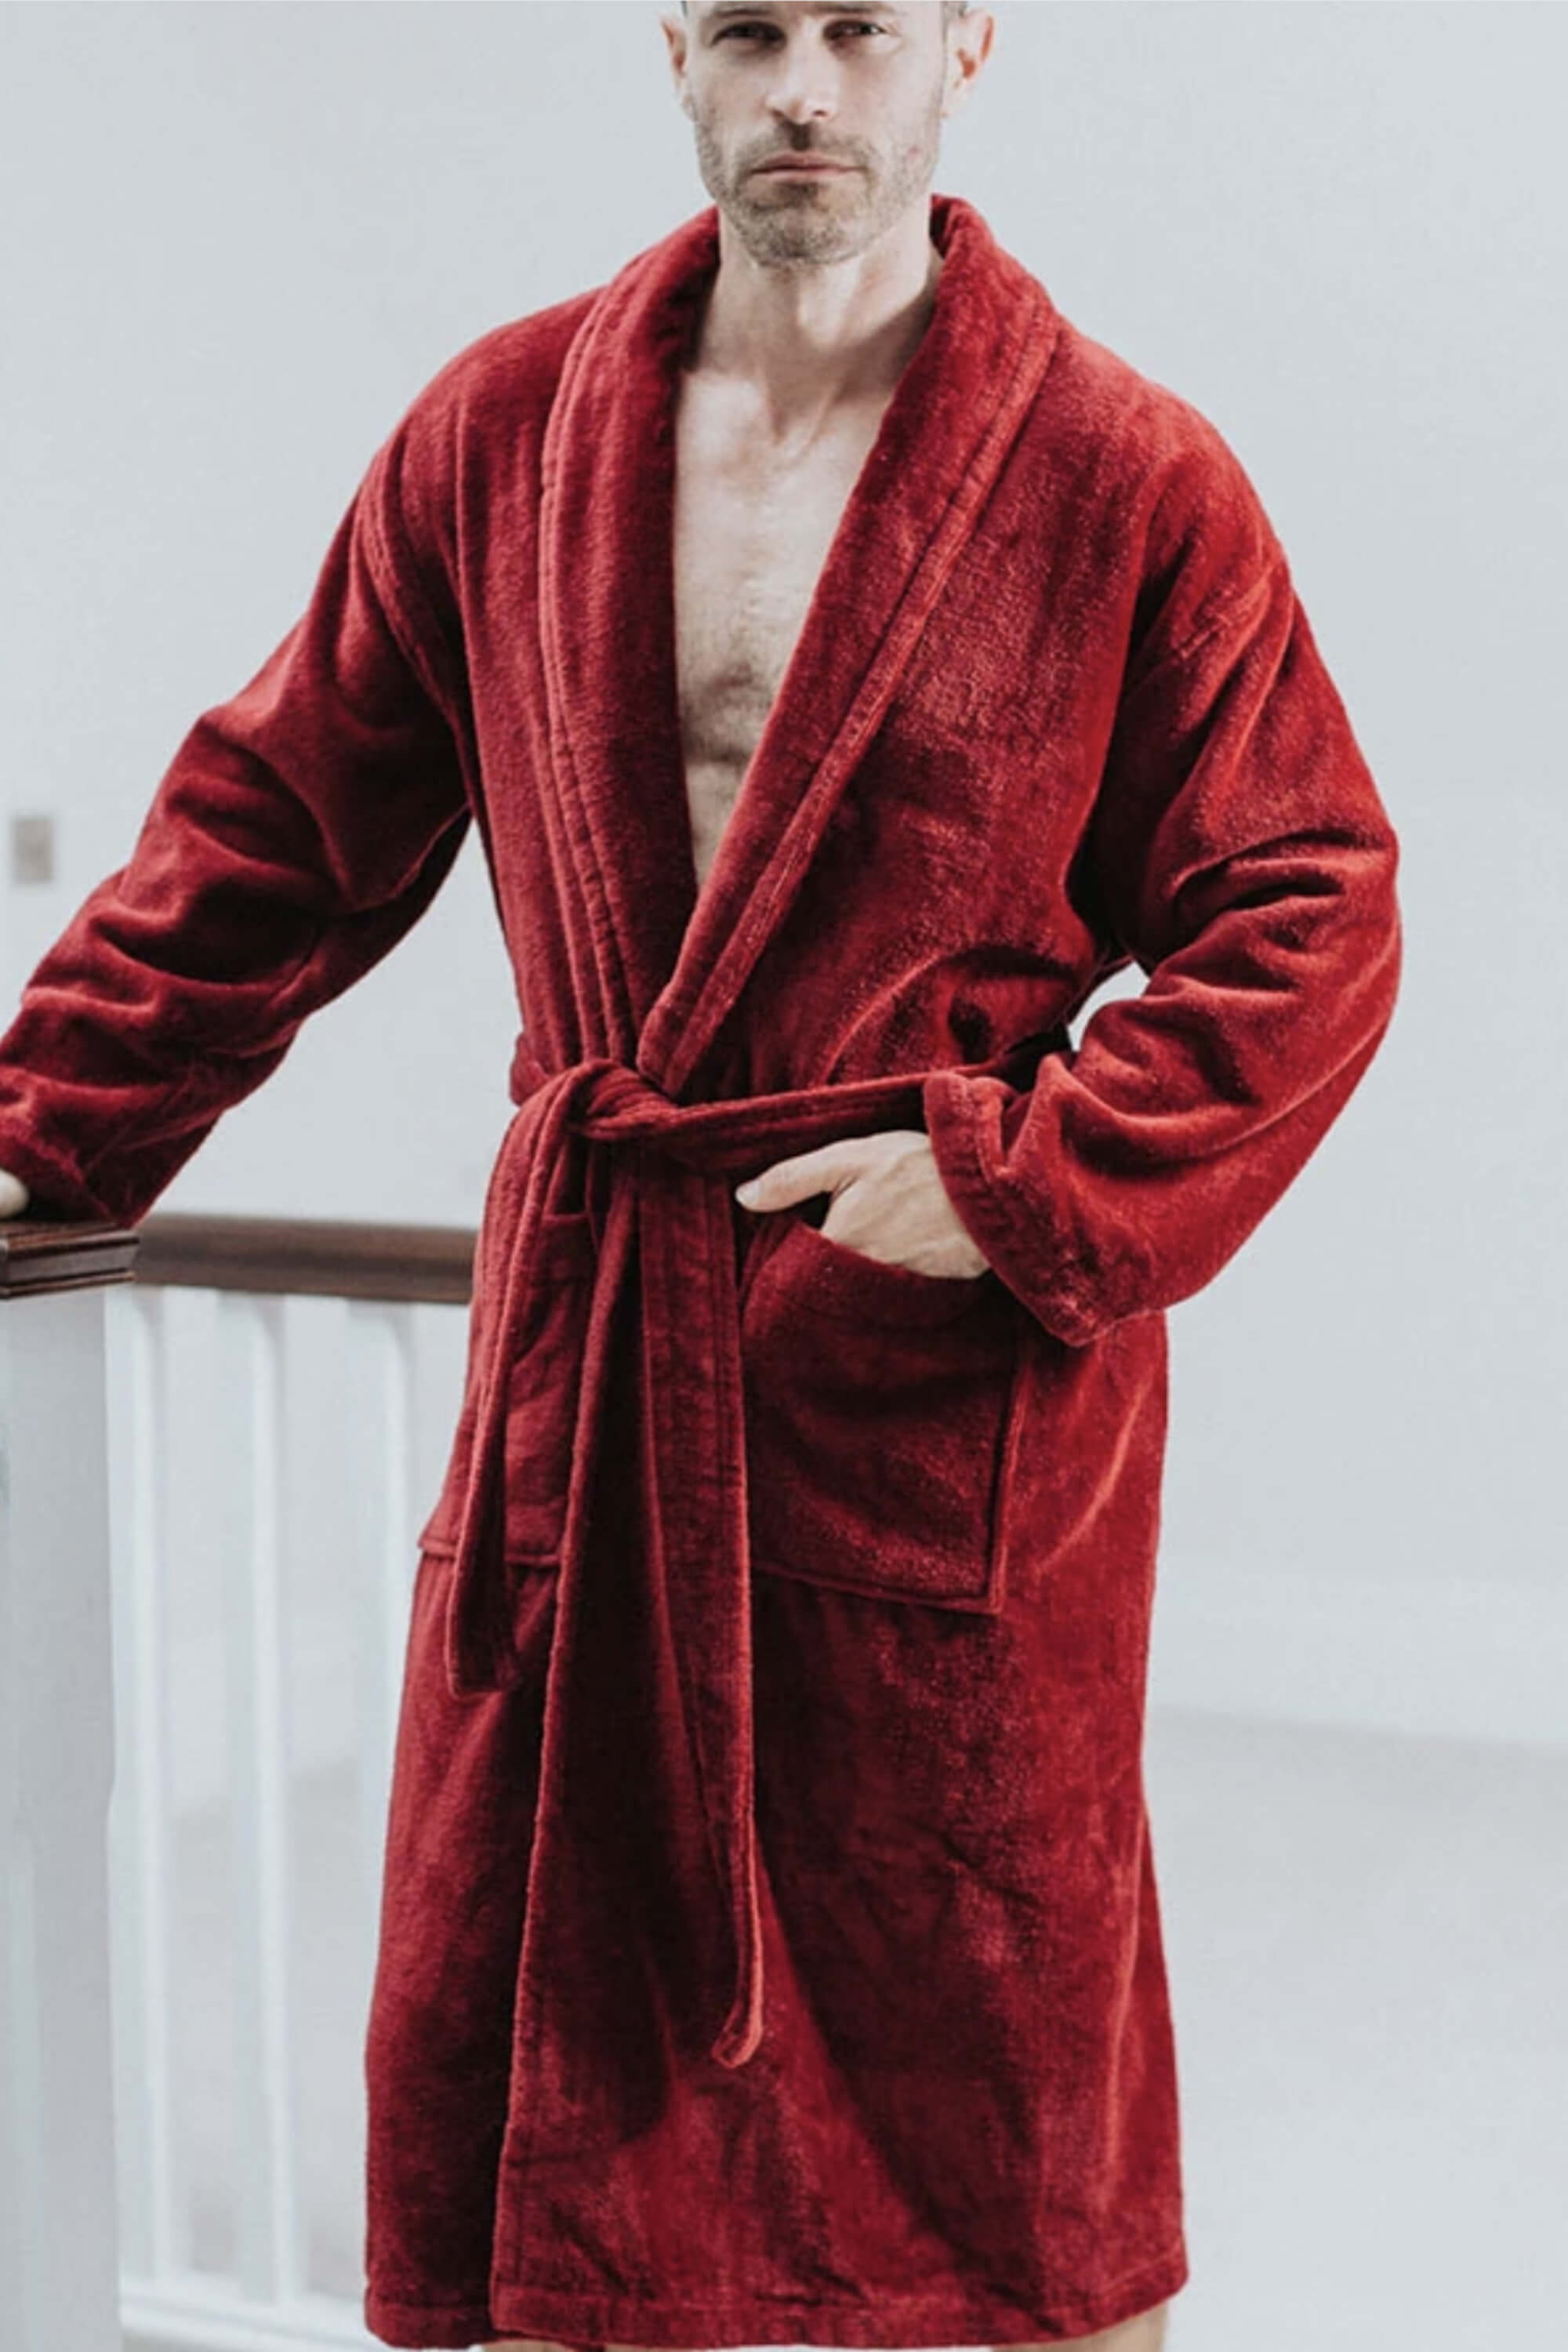 Bown of London Baron Dressing Gown Burgundy